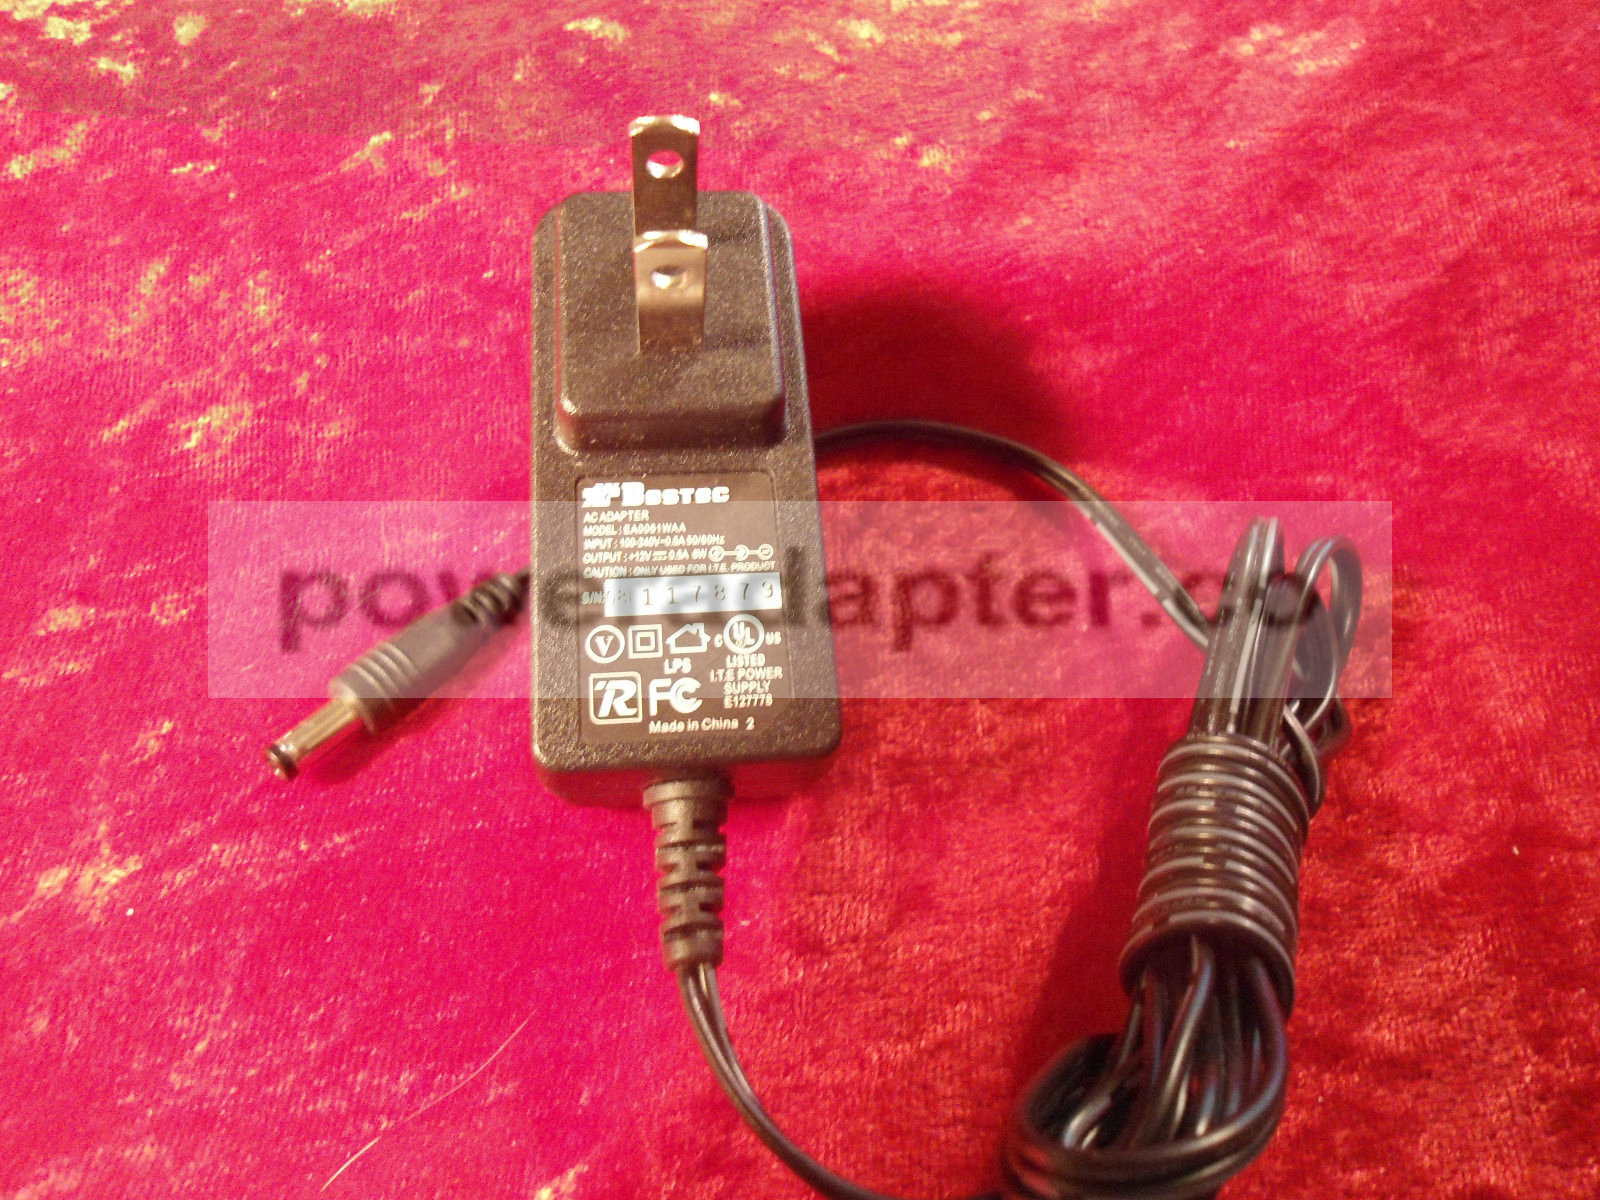 Bestec EA0061WAA AC Adapter Output: +12V Condition: Used : Seller Notes: “May come in white” Brand: Bestec MPN: EA0 - Click Image to Close